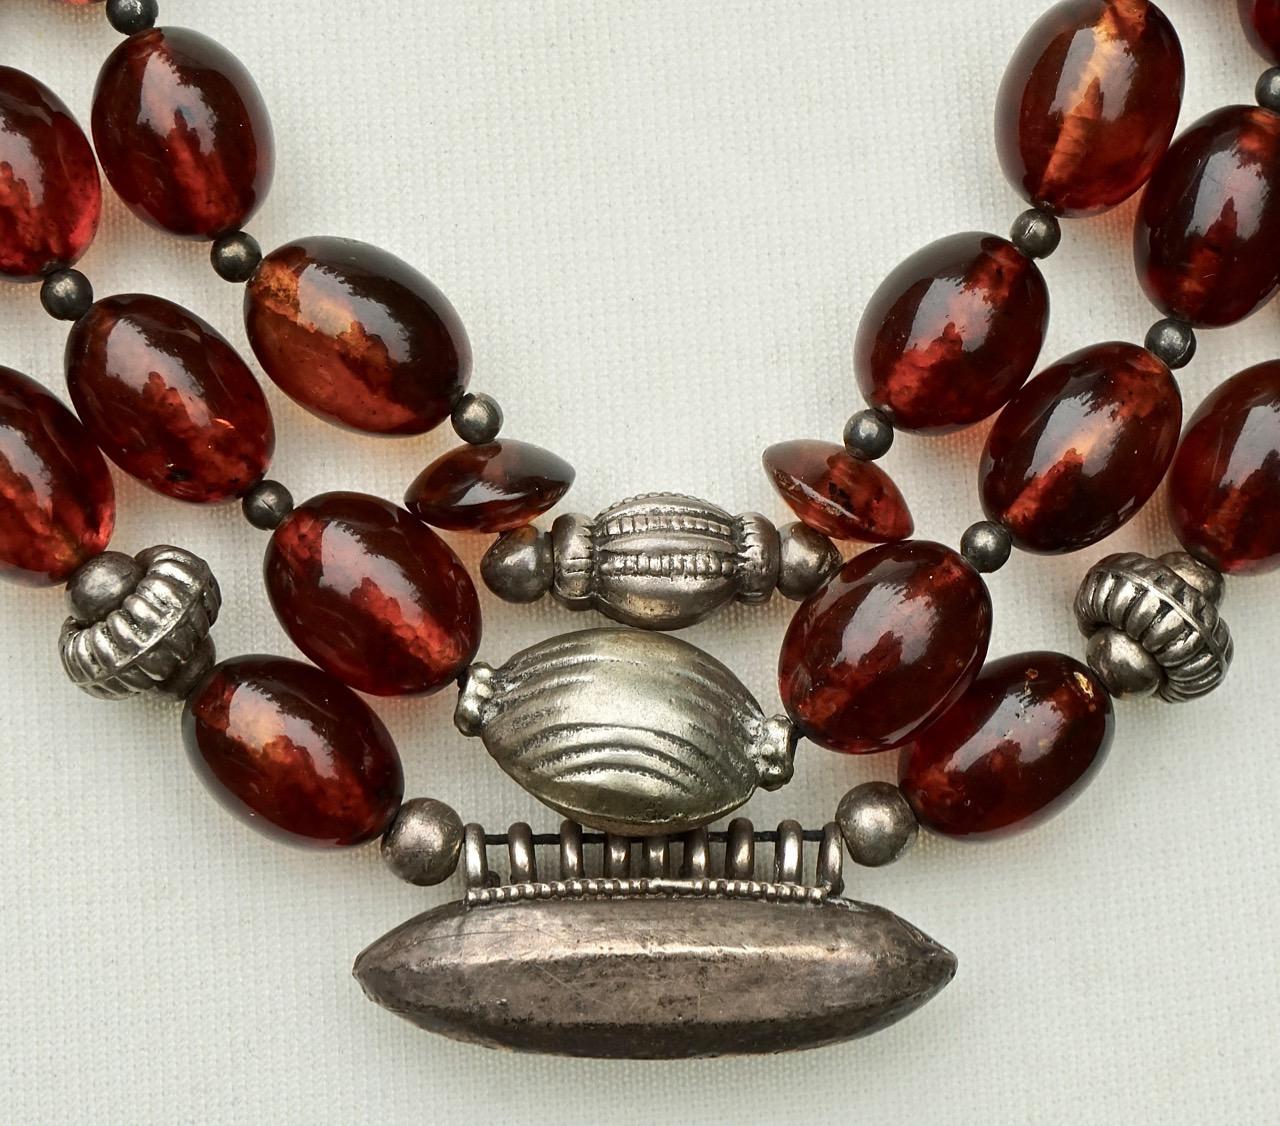 Hand made decorative silver tone necklace with beautiful polished cognac amber beads, and a simple hook clasp. The first strand has two lighter amber beads and disk shaped beads. They are strung on black thread, which is a little loose at the ends,